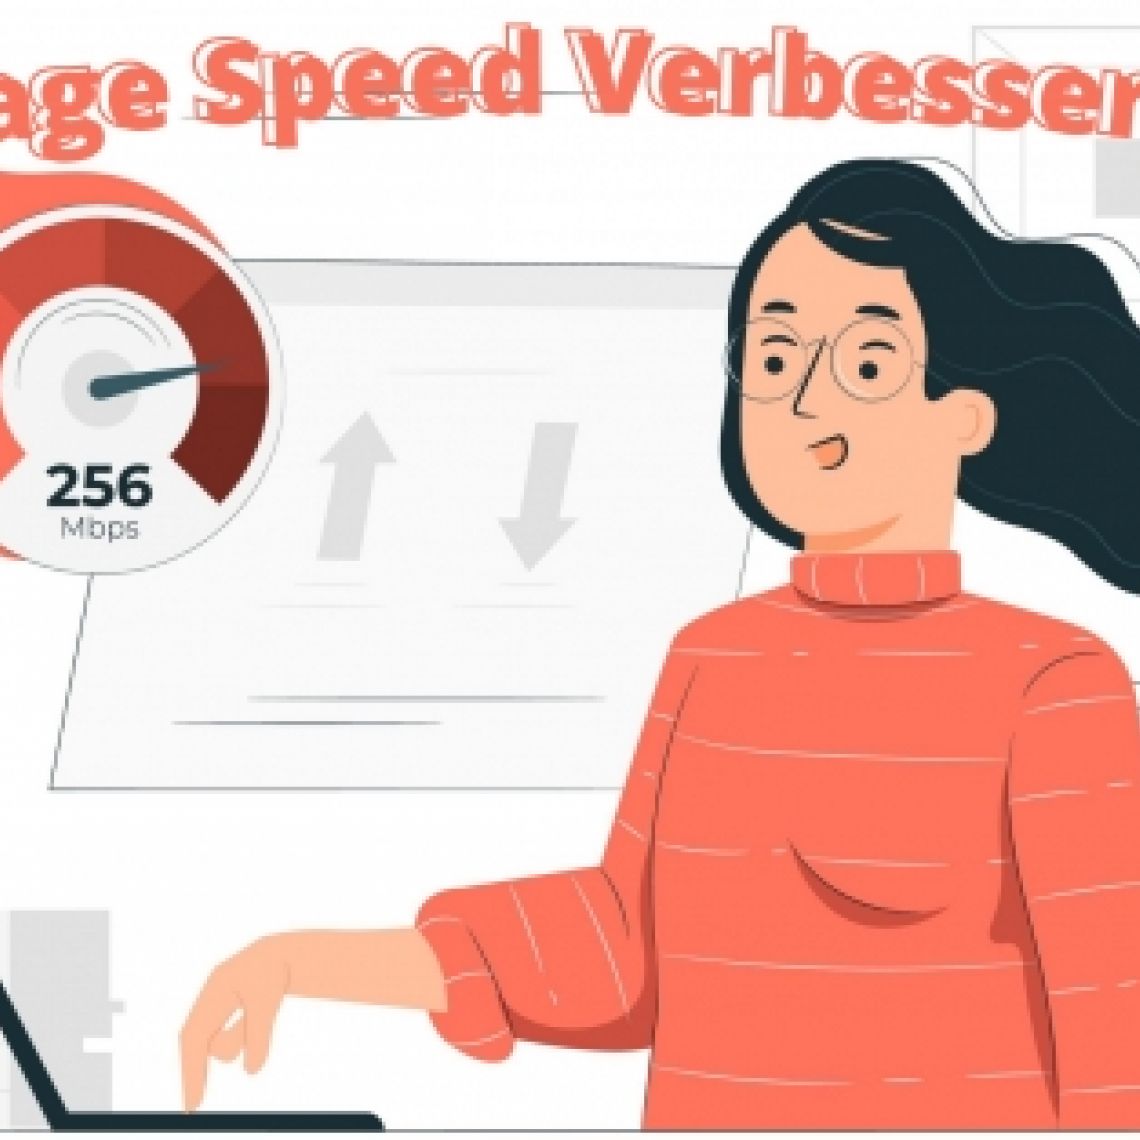 Page Speed? - What is it good for?